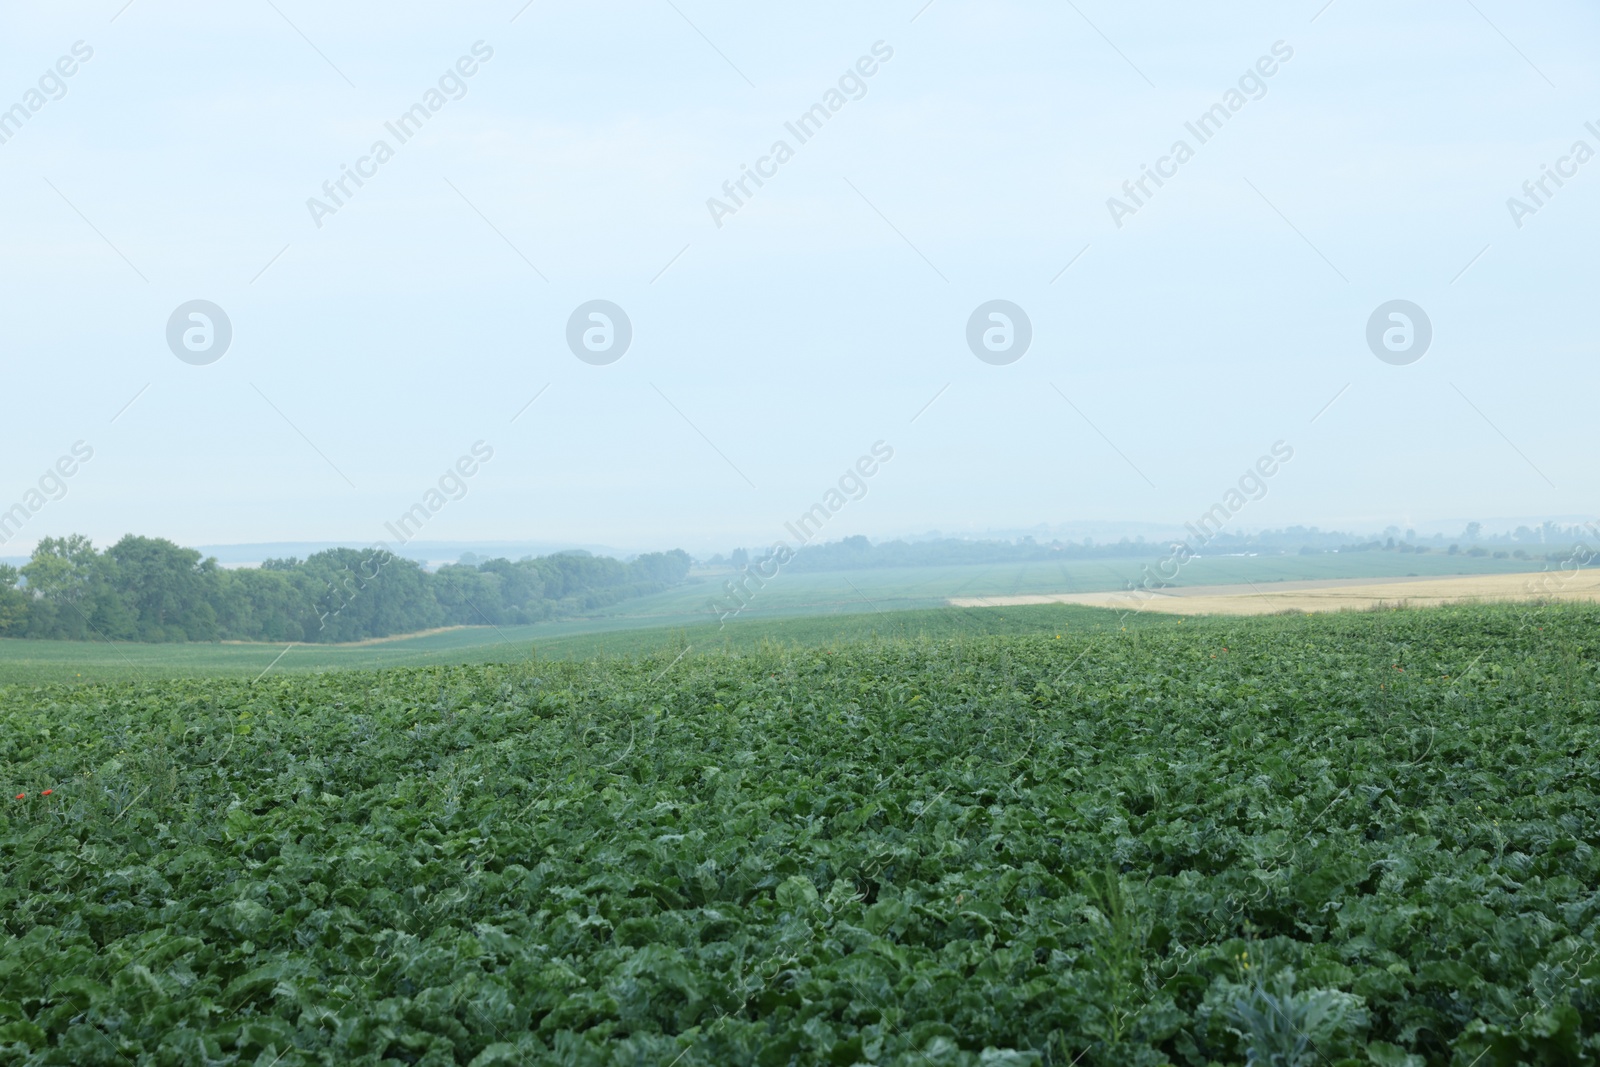 Photo of Beautiful view of beet plants growing in field